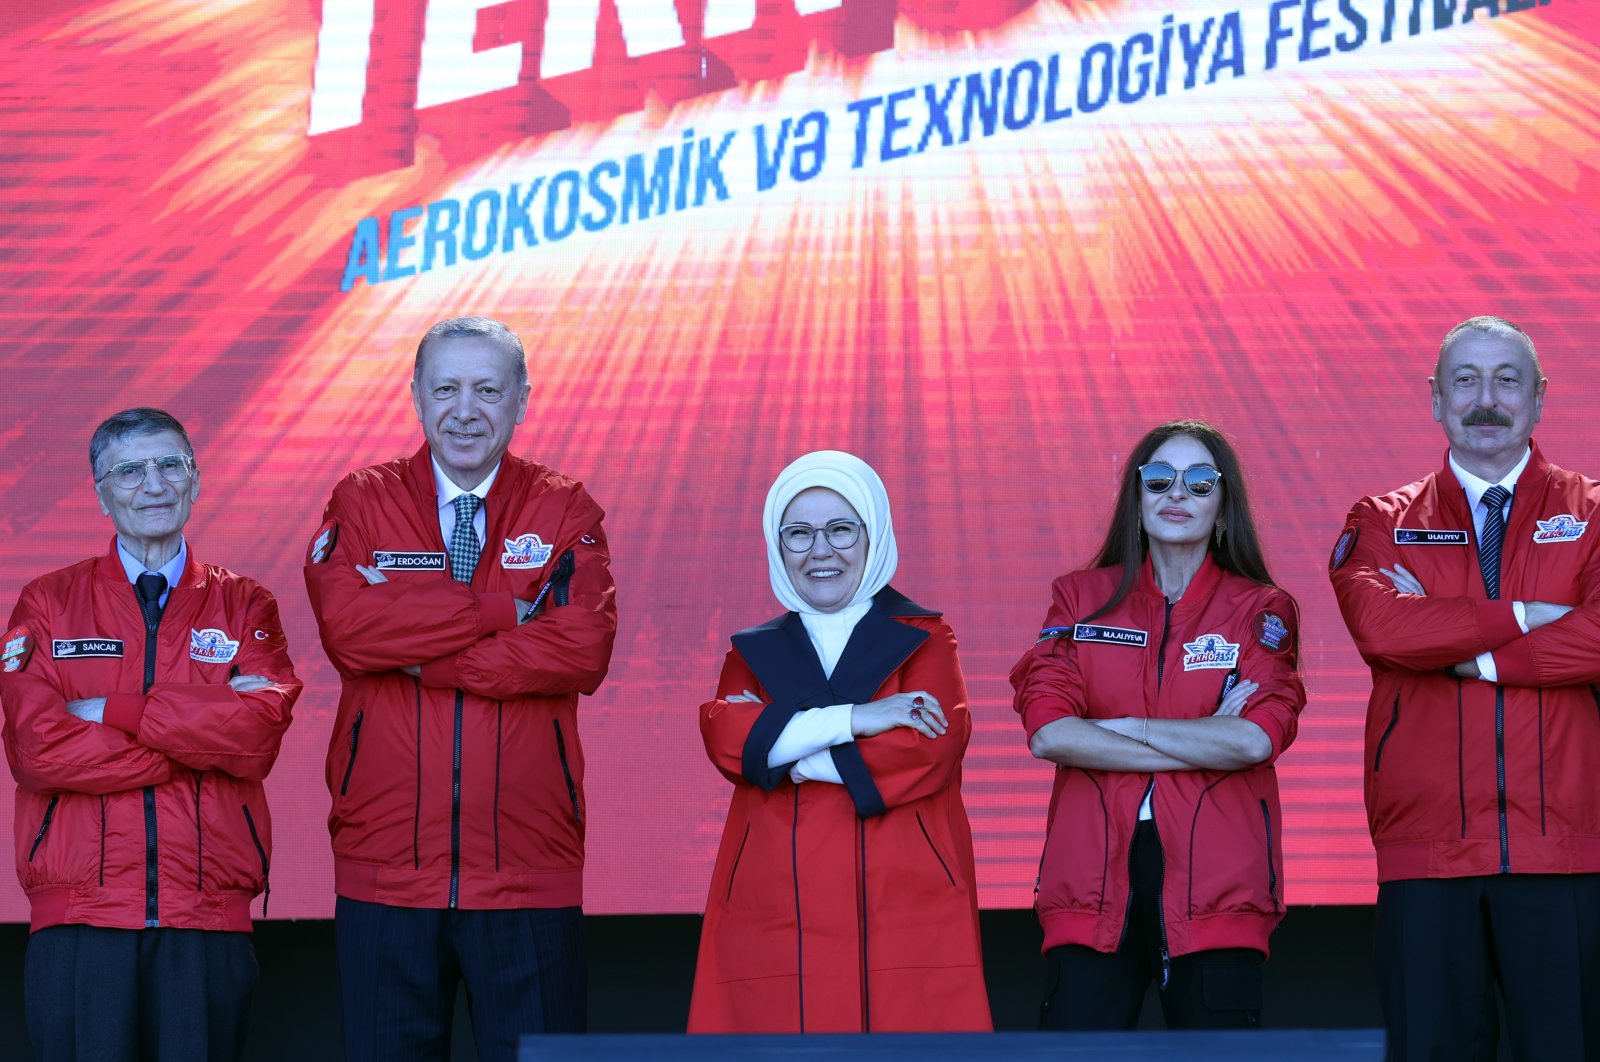 President Recep Tayyip Erdoğan (2nd L) and first lady Emine Erdoğan (C), Azerbaijani President Ilham Aliyev (R) and first Vice President Mihriban Aliyeva (2nd R) and Turkish Nobel laureate scientist Aziz Sancar pose for a photo during the Baku edition of science and aviation festival Teknofest in Azerbaijan, May 28, 2022 (AA Photo)